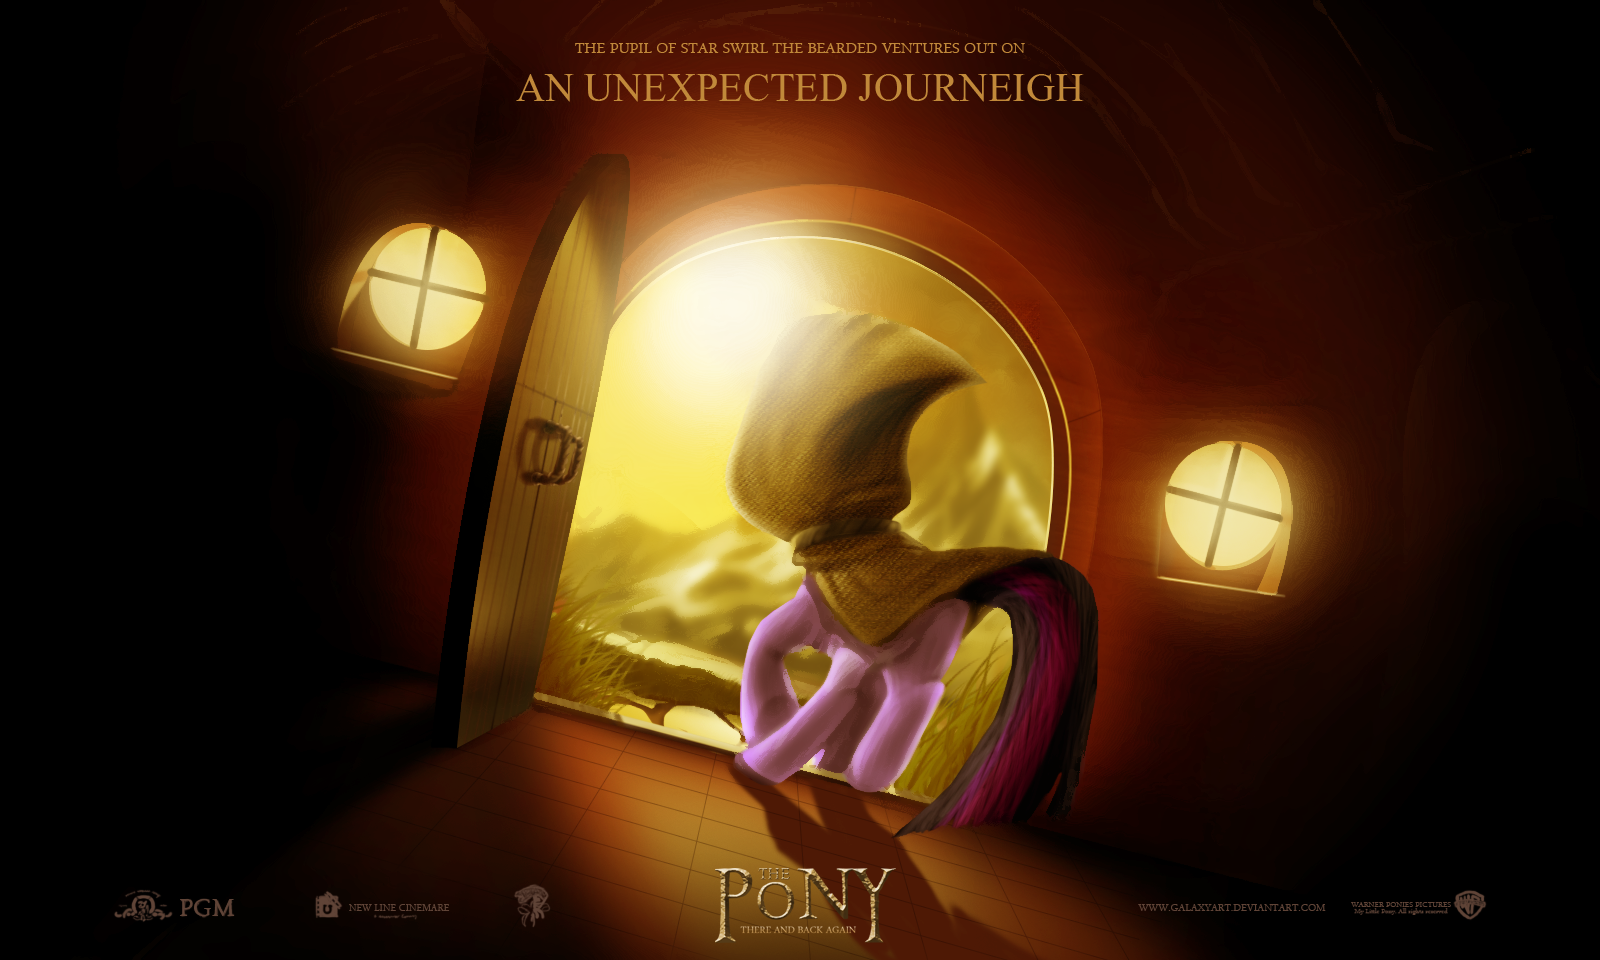 The Pony: An Unexpected Journeigh by Galaxyart